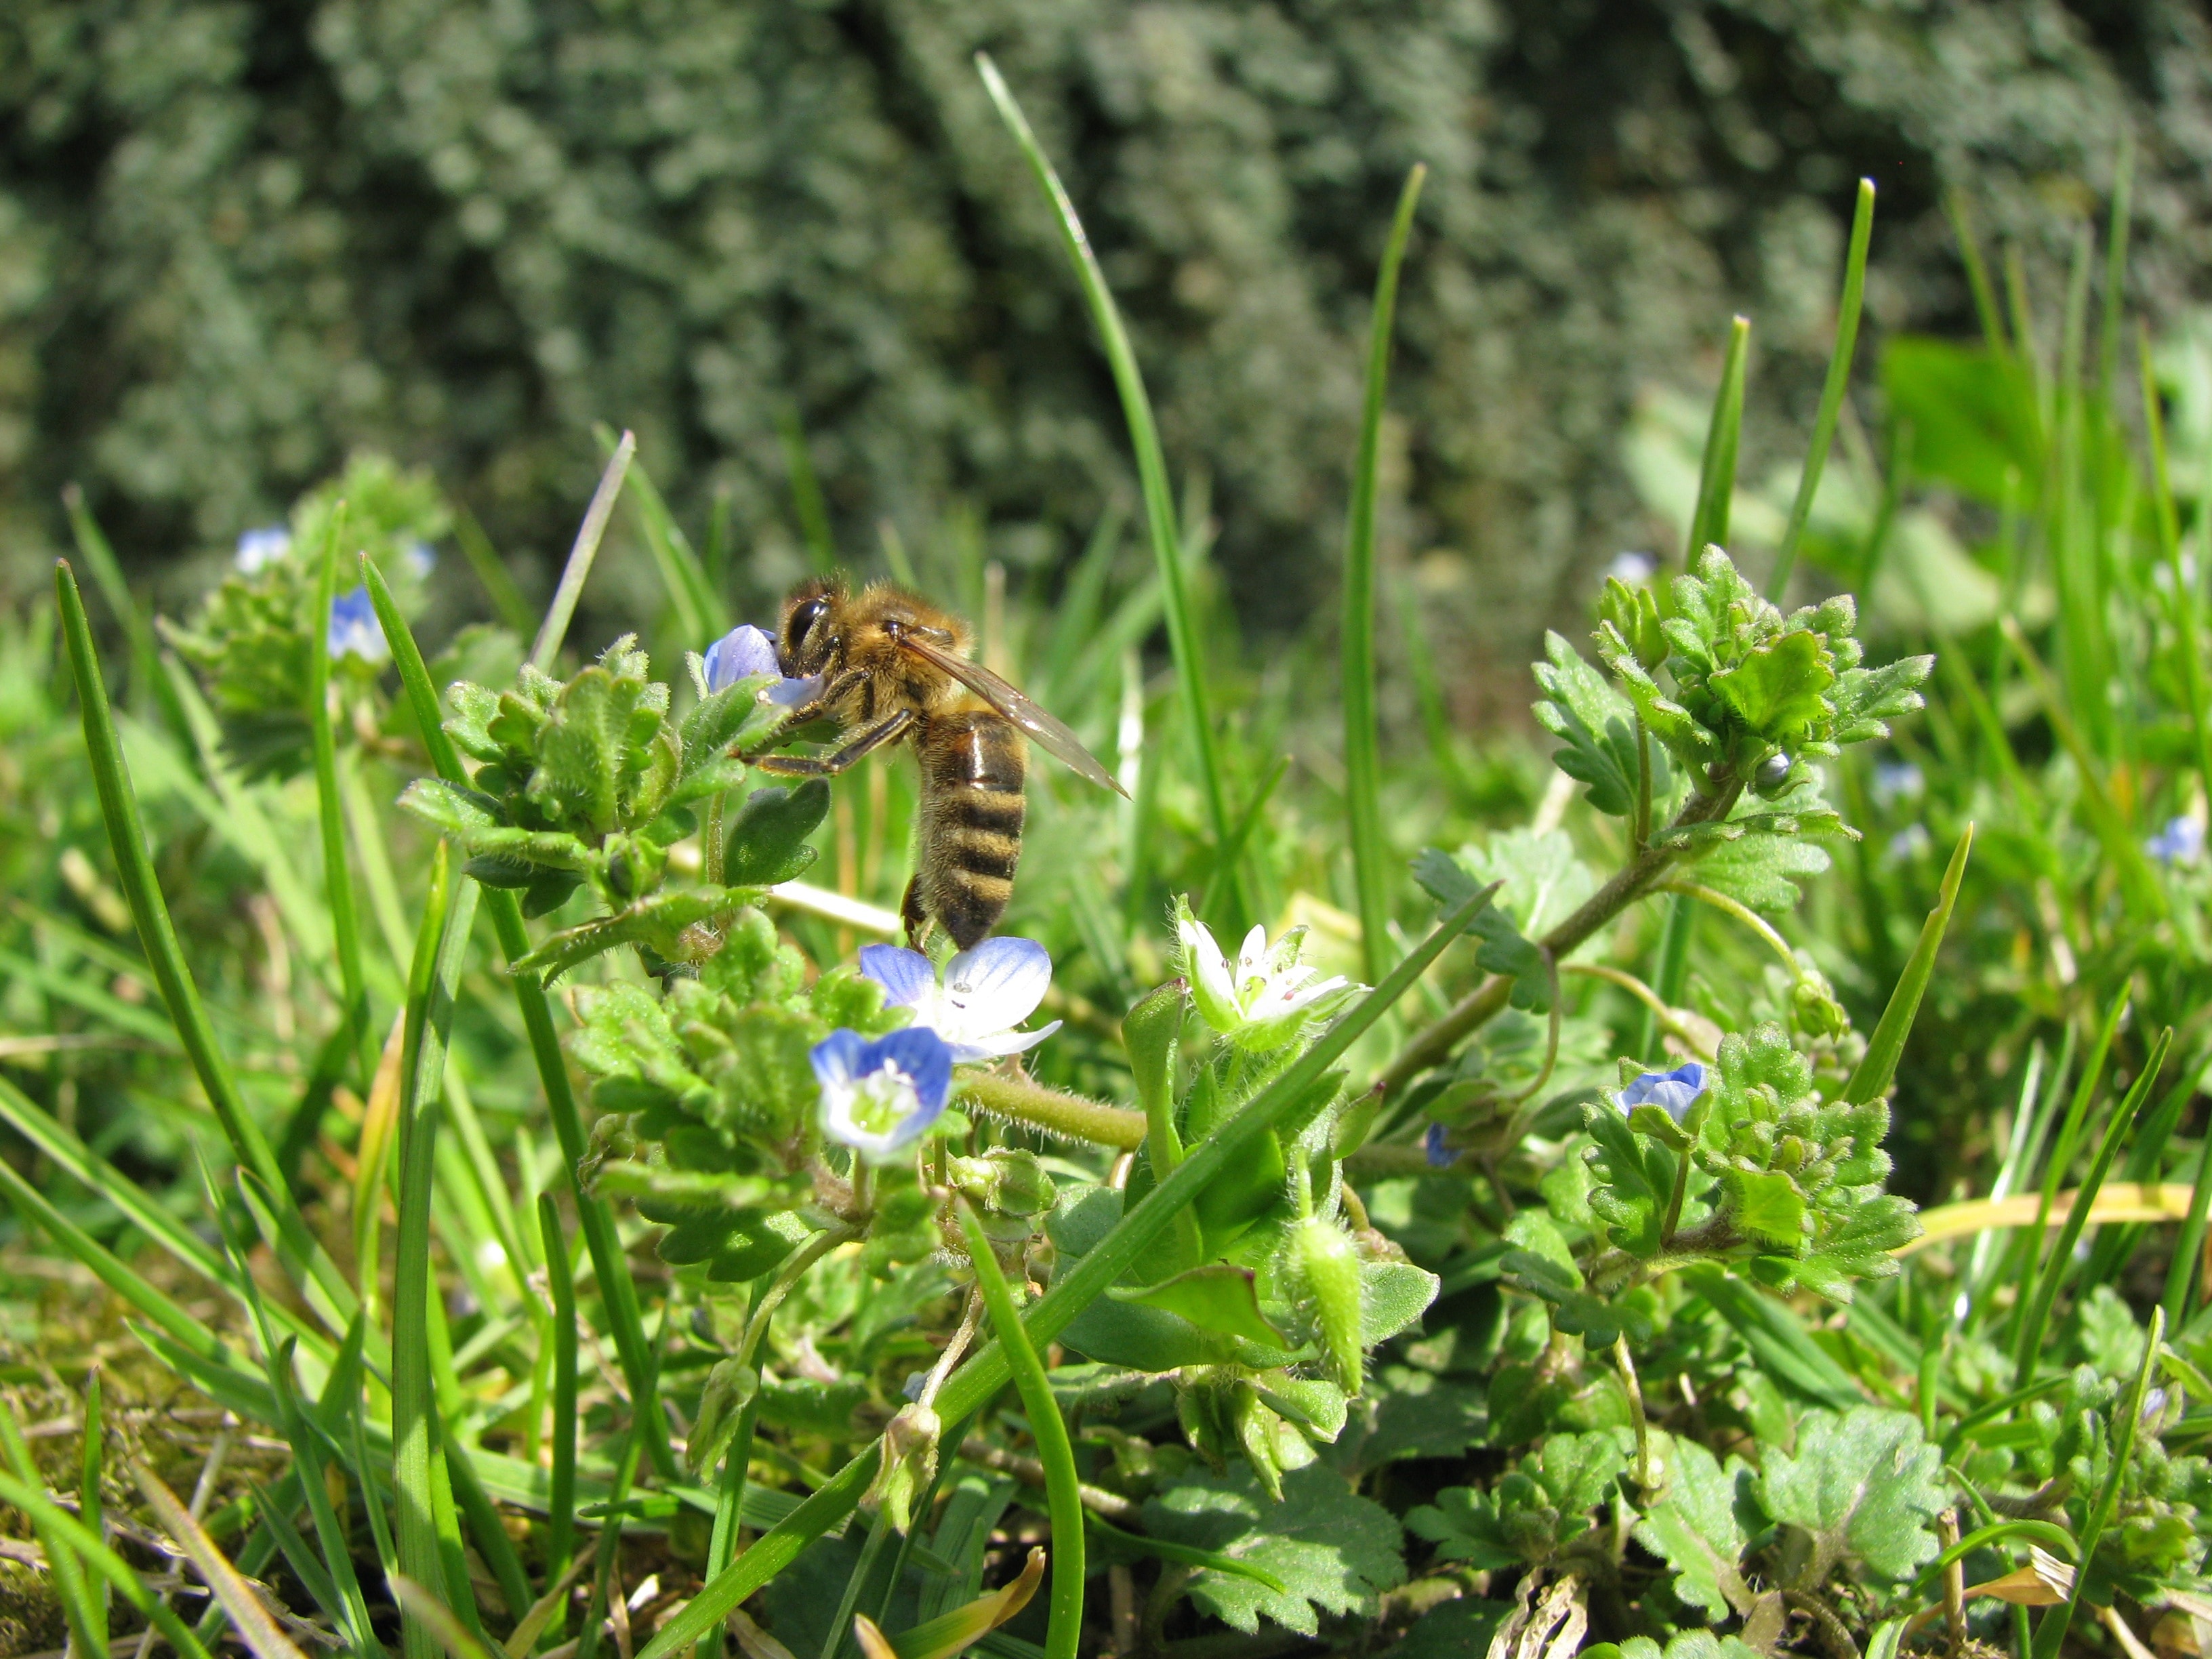 honey bee perched on blue and white flower in shallow focus lens